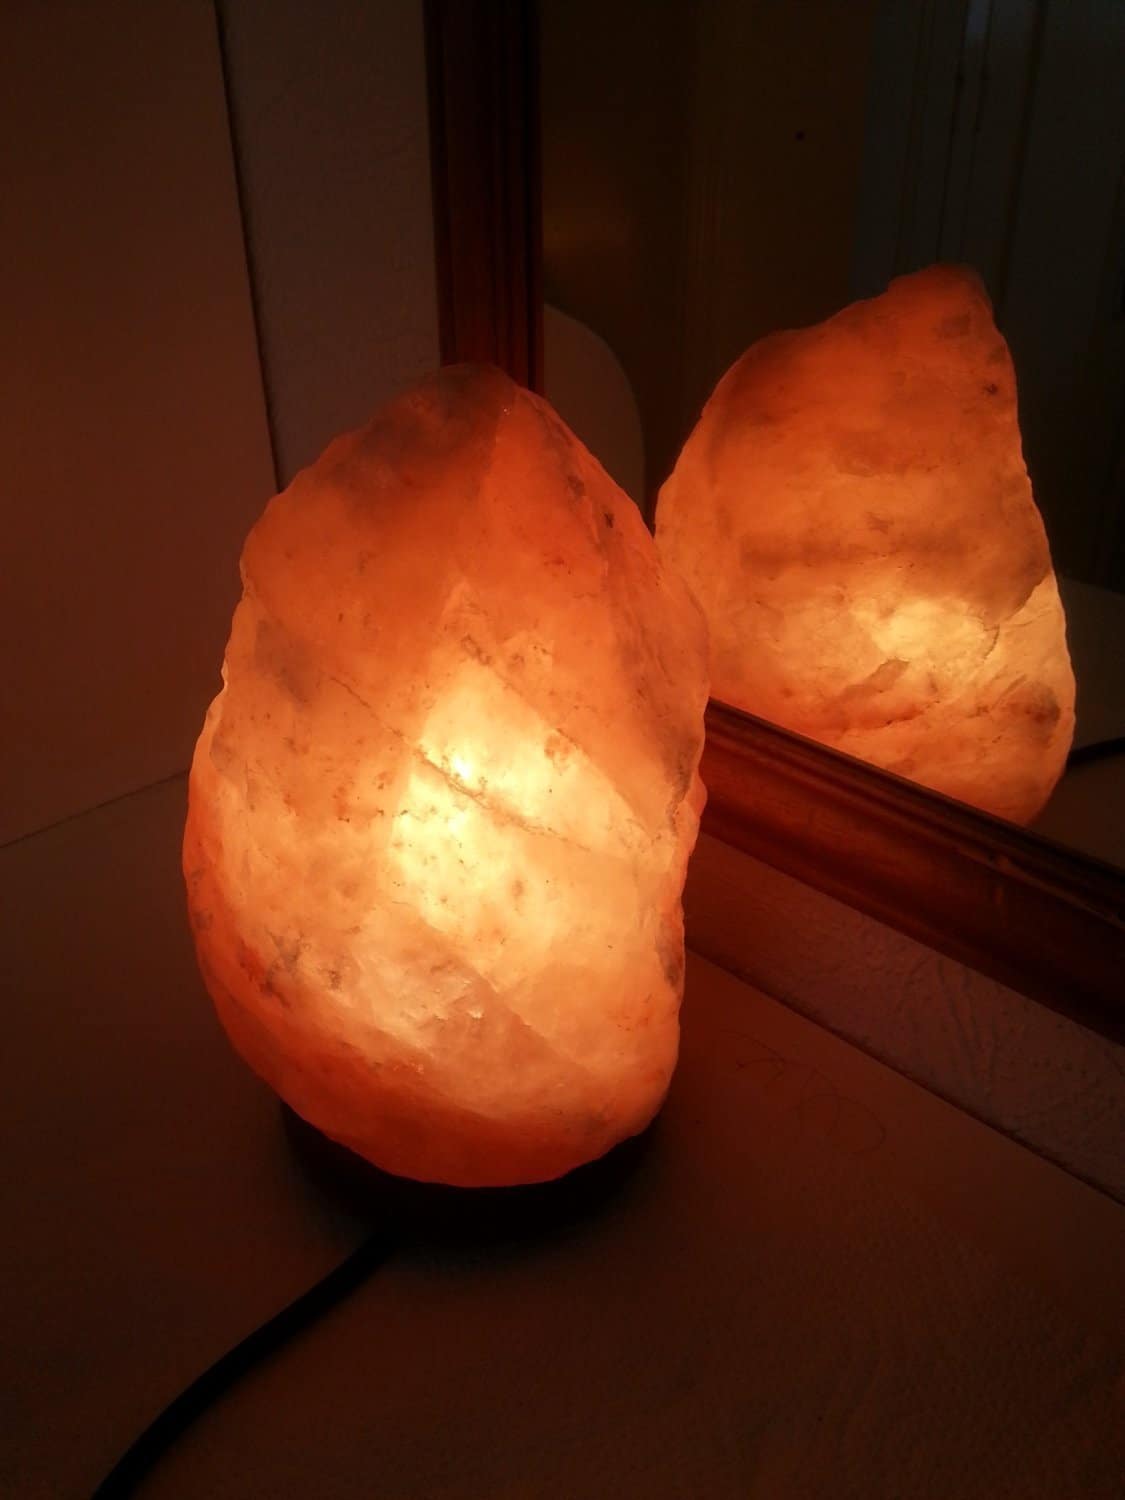 4 Bulb + 100% Premium QUALITY NATURAL PINK HIMALAYAN CRYSTAL ROCK SALT LAMP WITH BUTTON SWITCH AND BRITISH STANDARD ELECTRIC PLUG. 100 % PREMIUM AND FINE QUALITY SOURCEDIY®